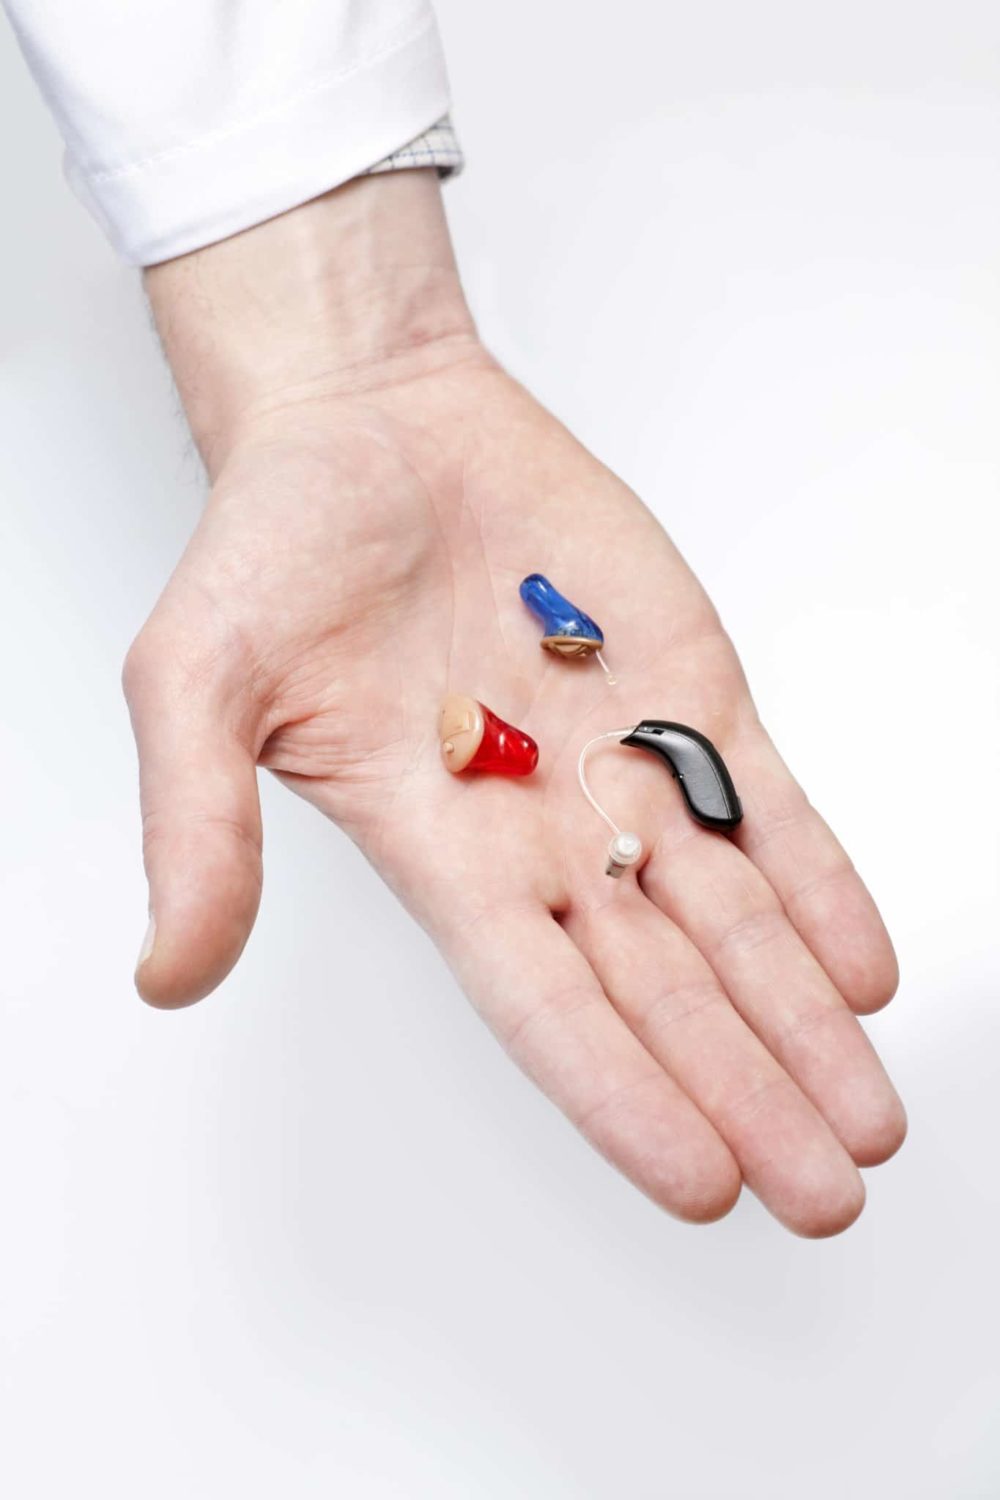 Hand holding different hearing aid types including BTE and In the canal